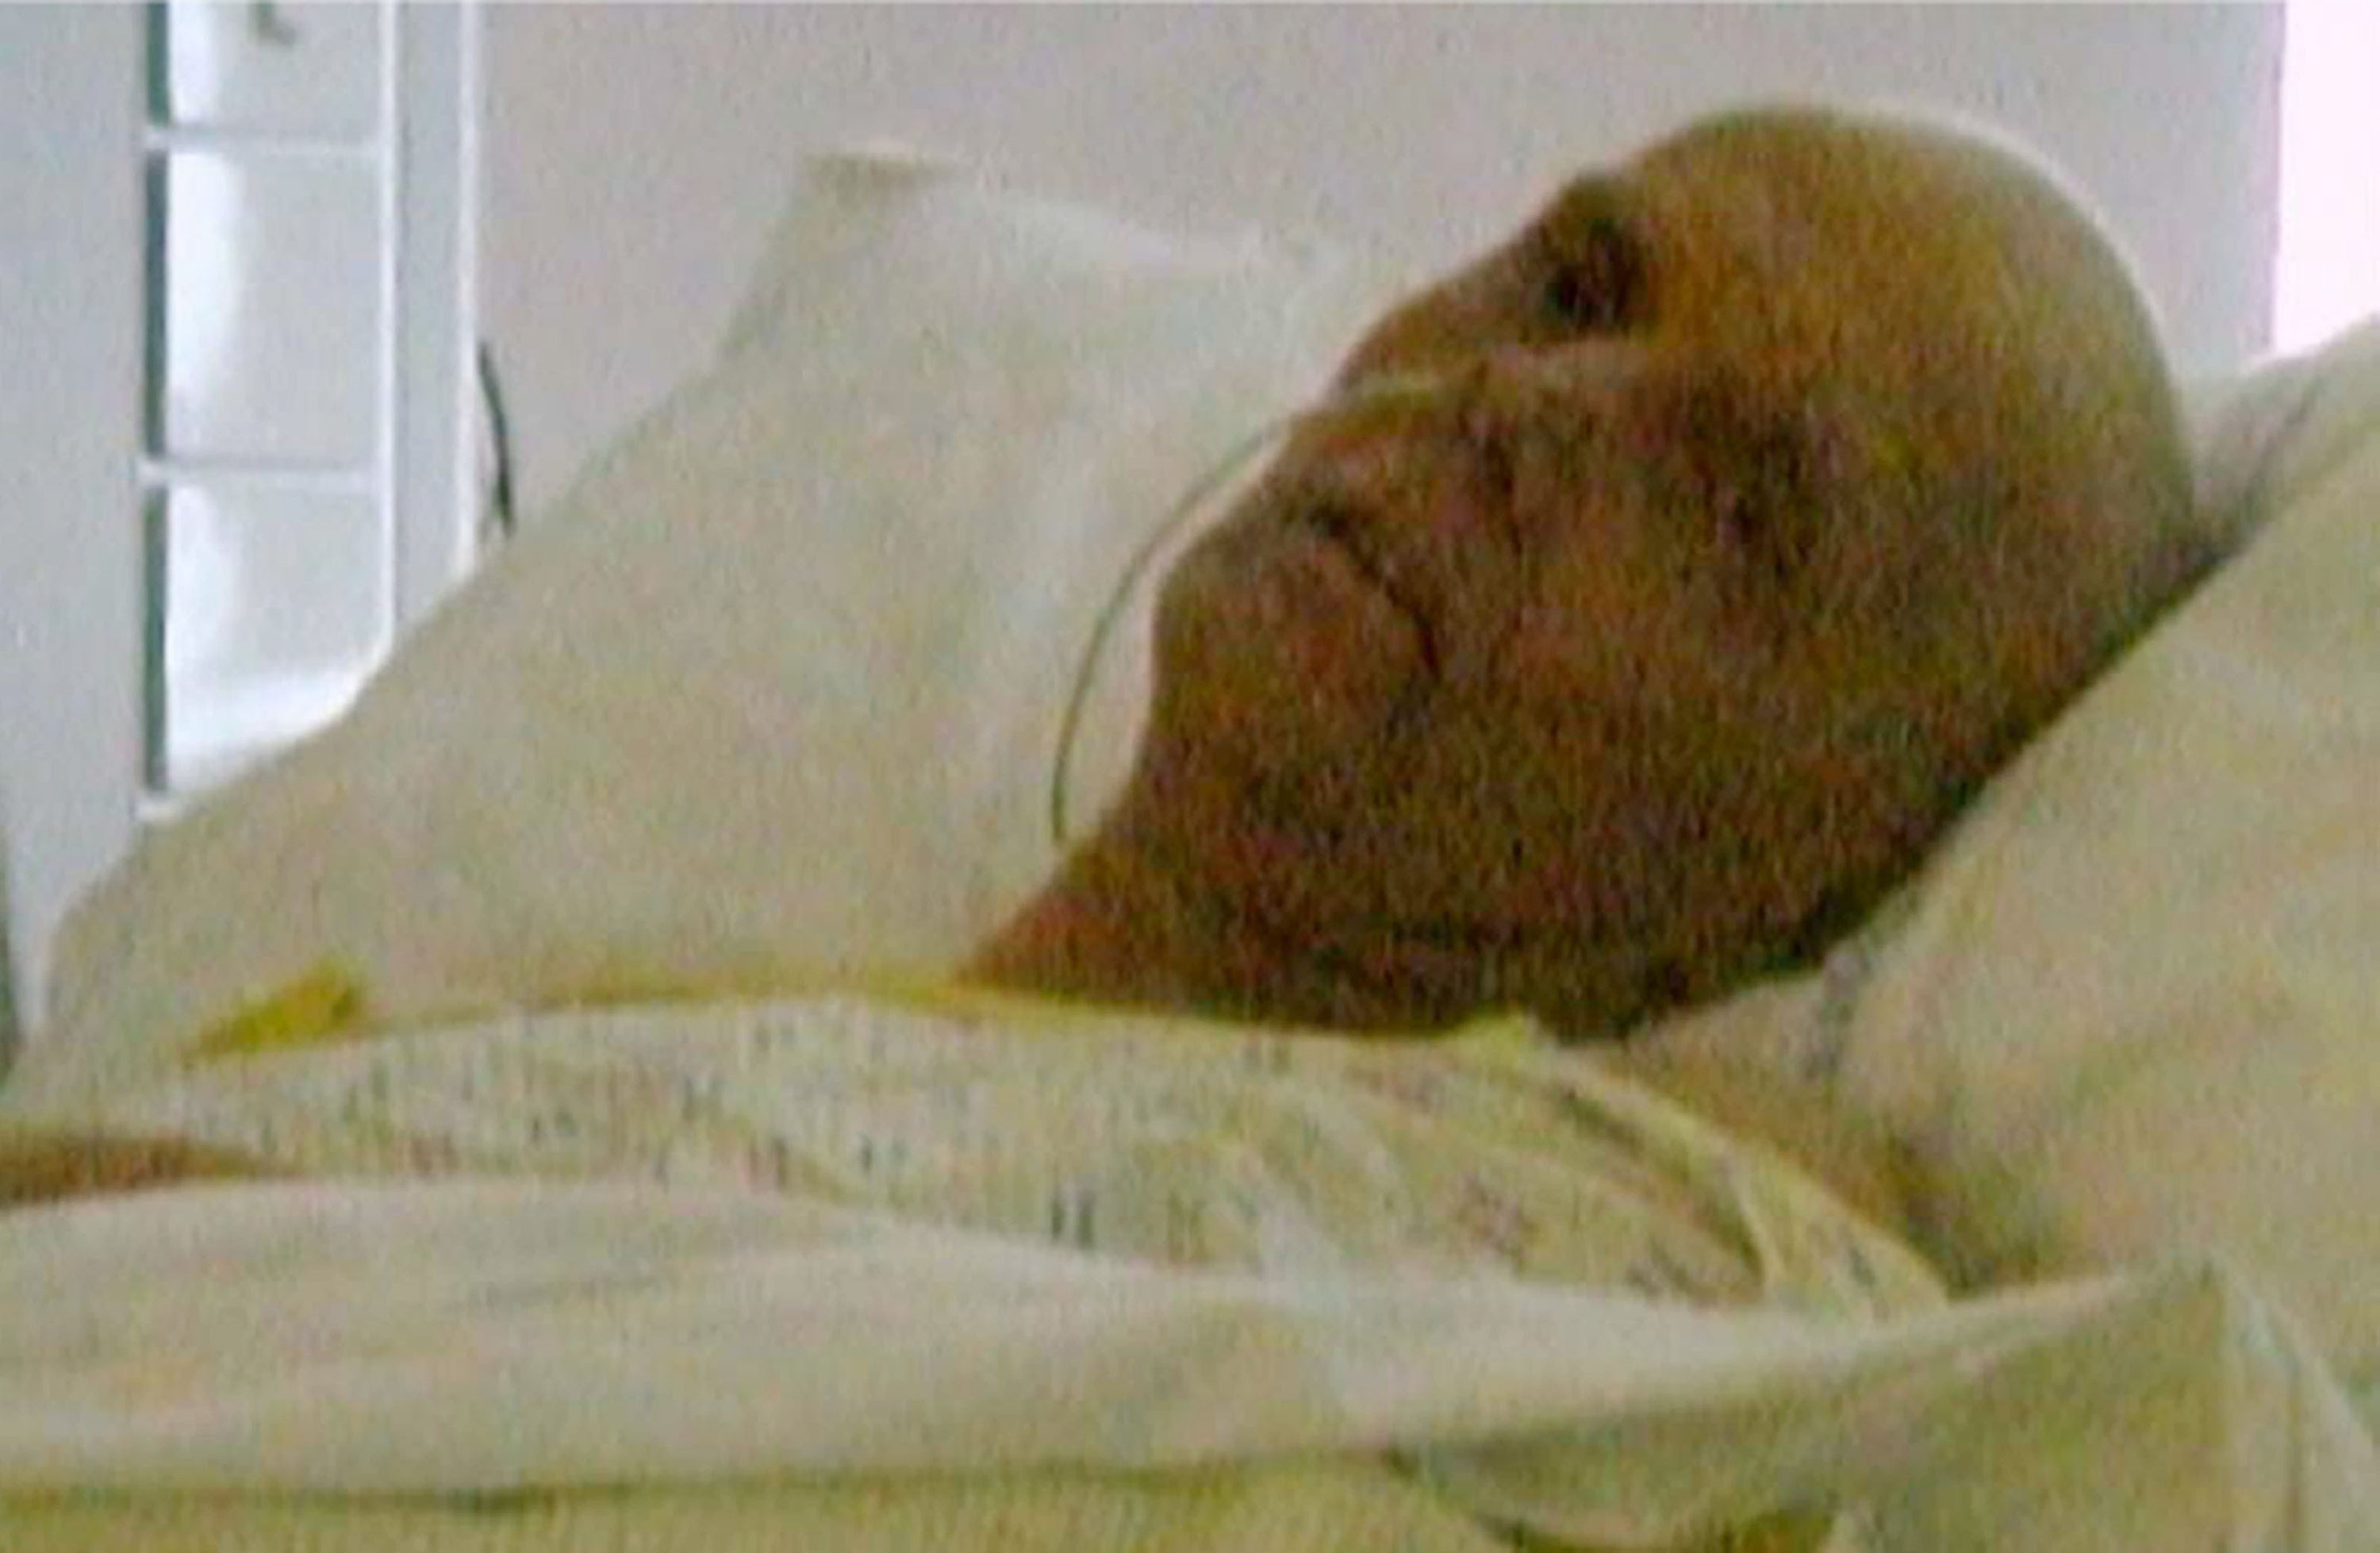 Alexander Litvinenko drank a cup of tea laced with polonium-210 and died in hospital a few weeks later